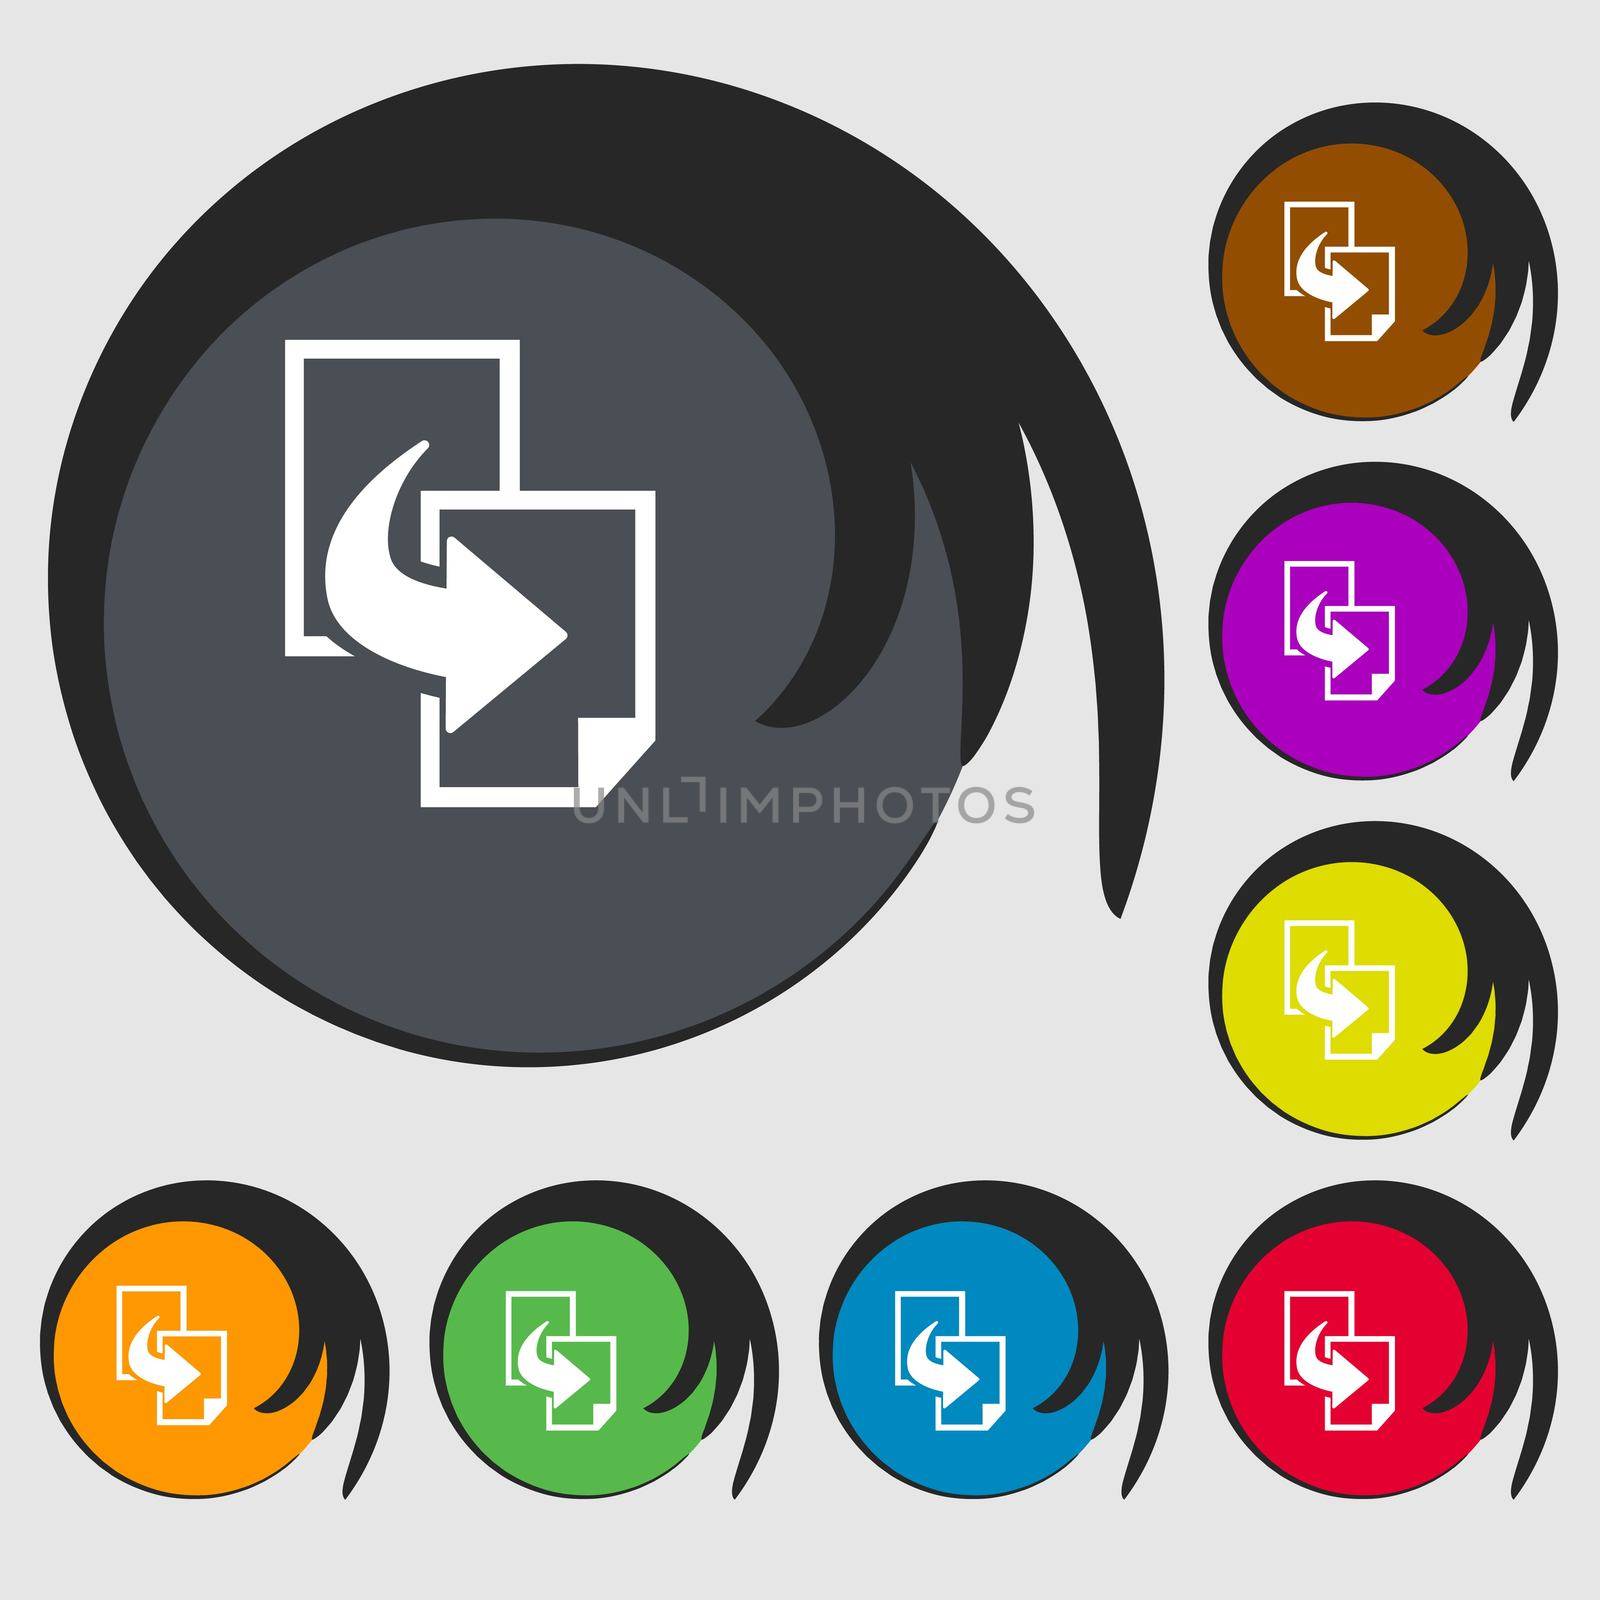 Copy file sign icon. Duplicate document symbol. Symbols on eight colored buttons. illustration